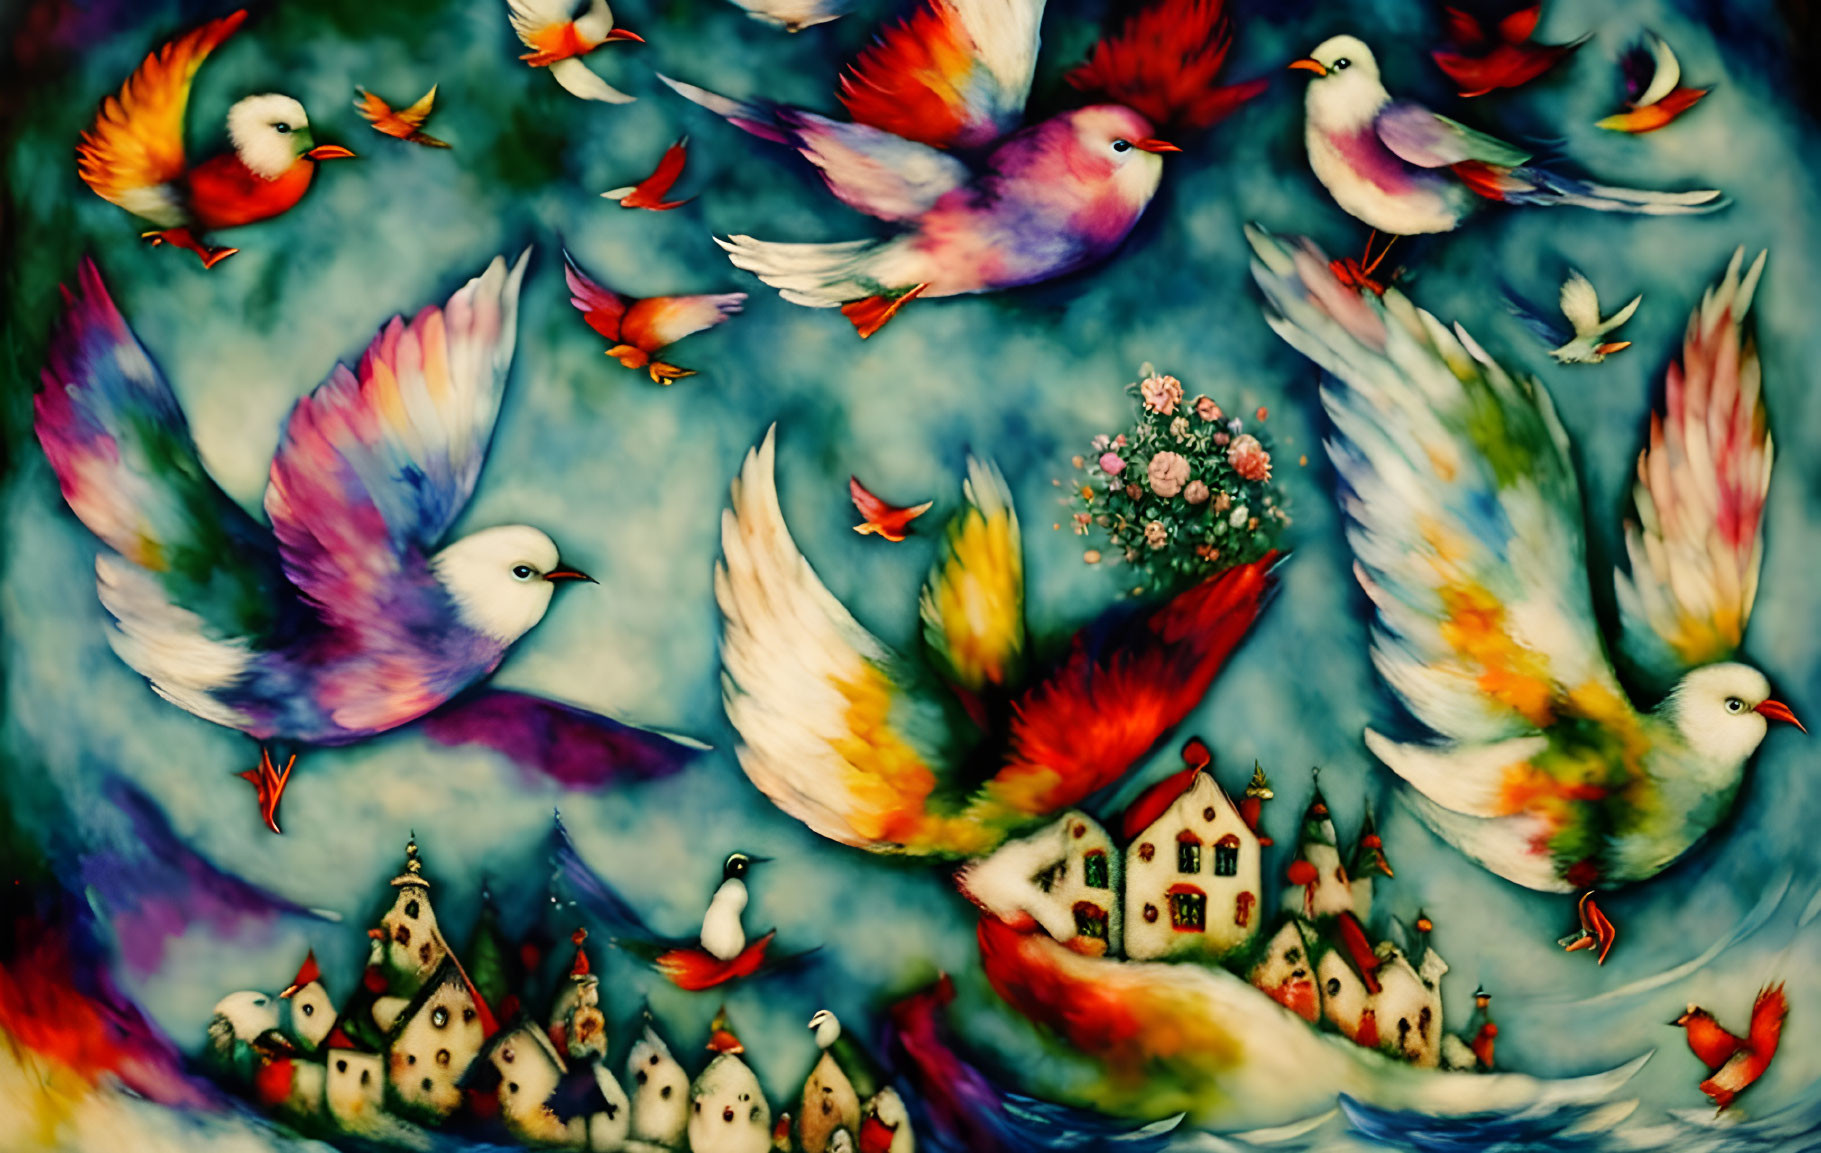 Colorful Birds Flying Over Whimsical Village in Painting